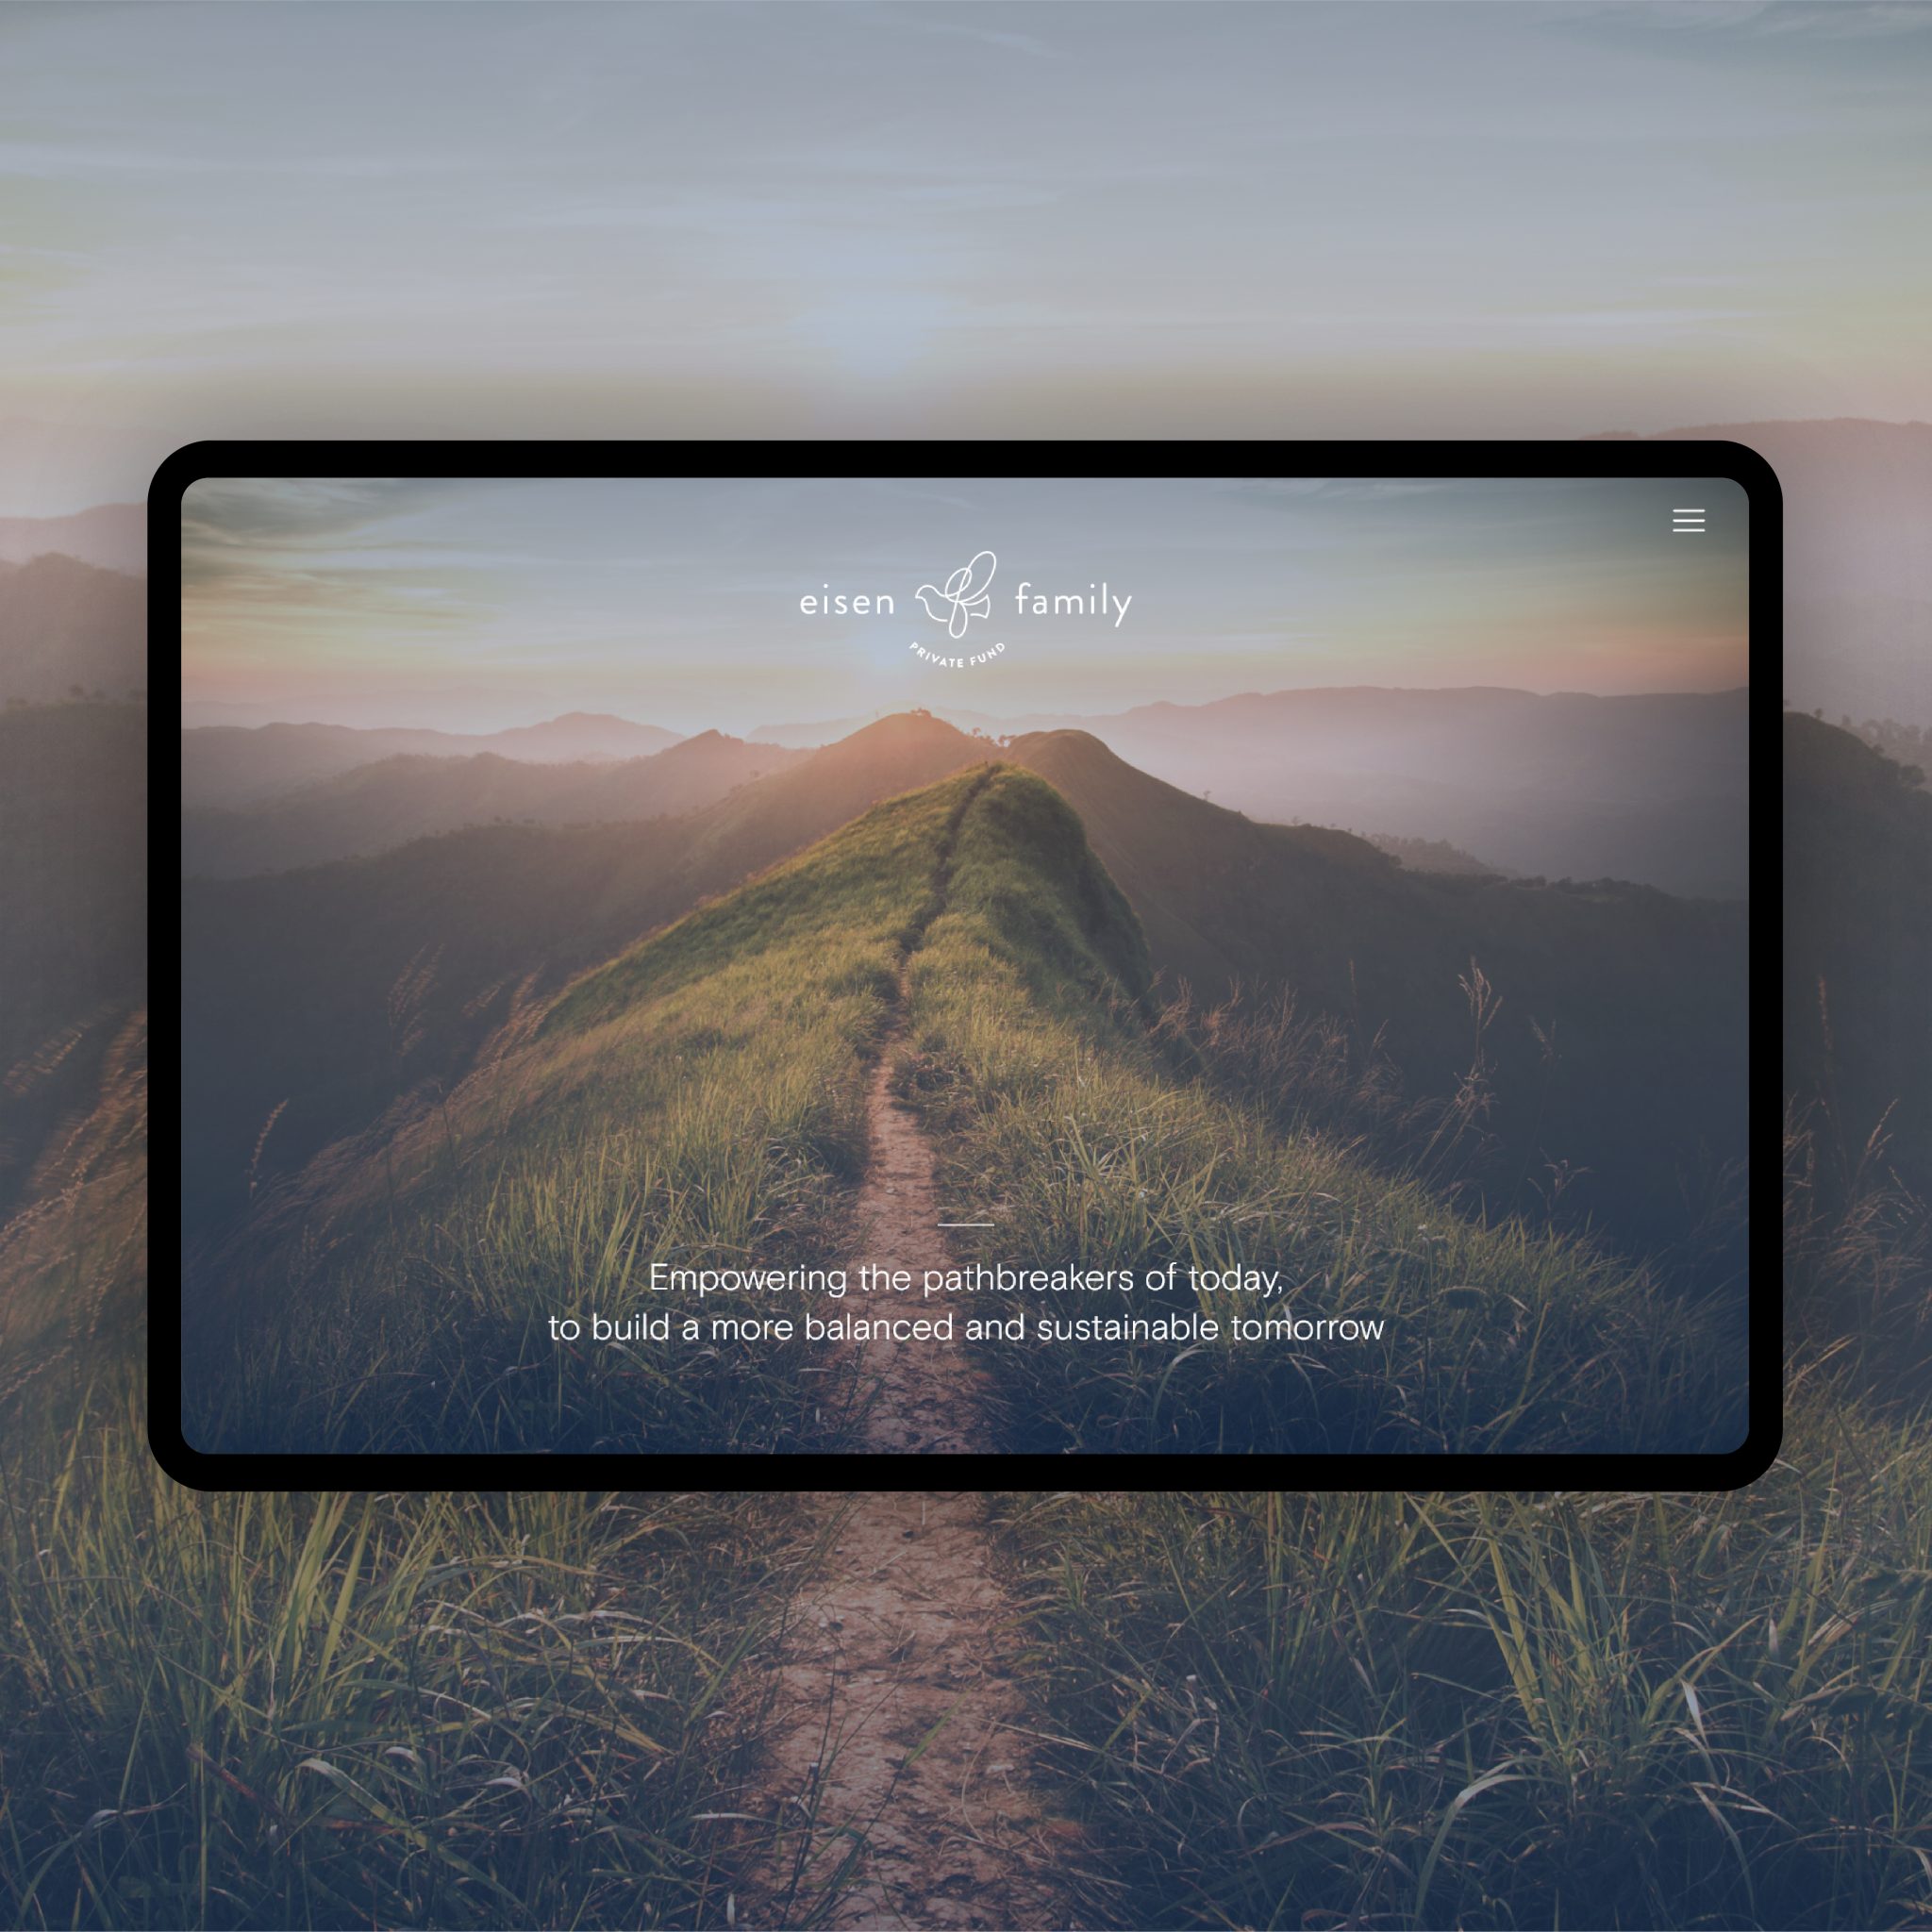 Eisen Family Private Fund website homepage mockup shown on desktop screen - white logo and tagline on a beautiful mountain landscape image